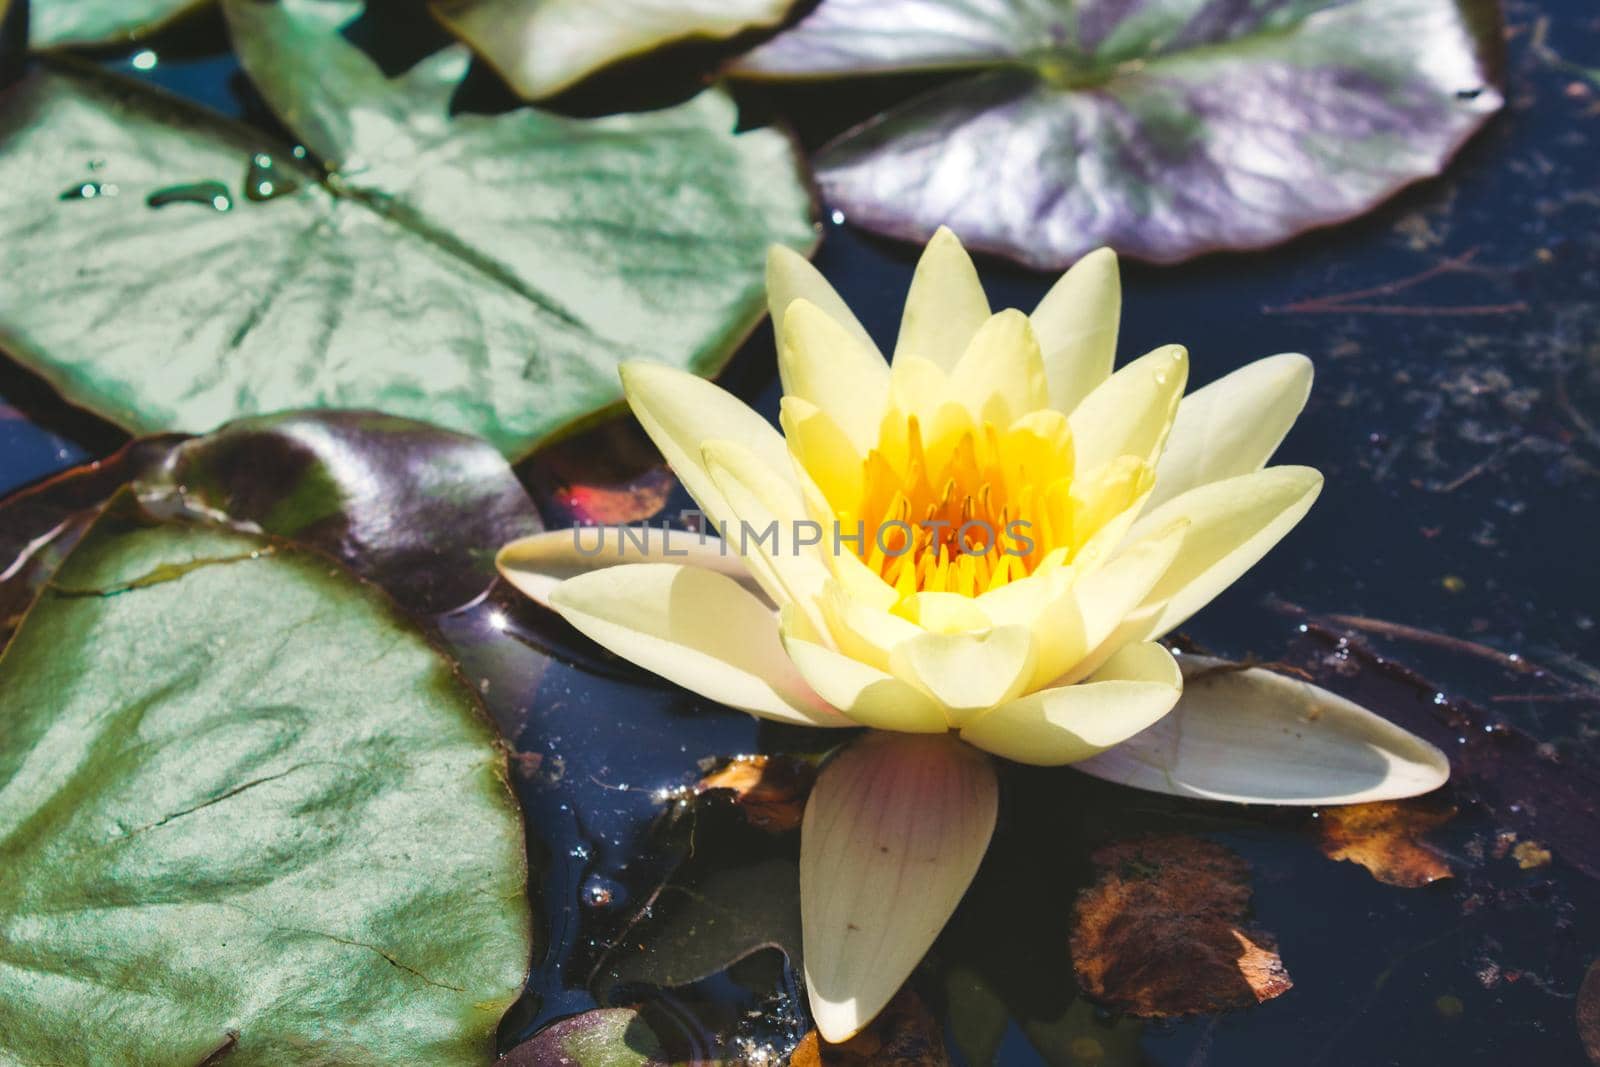 Water Lily floating on a dark pond with green lily pads